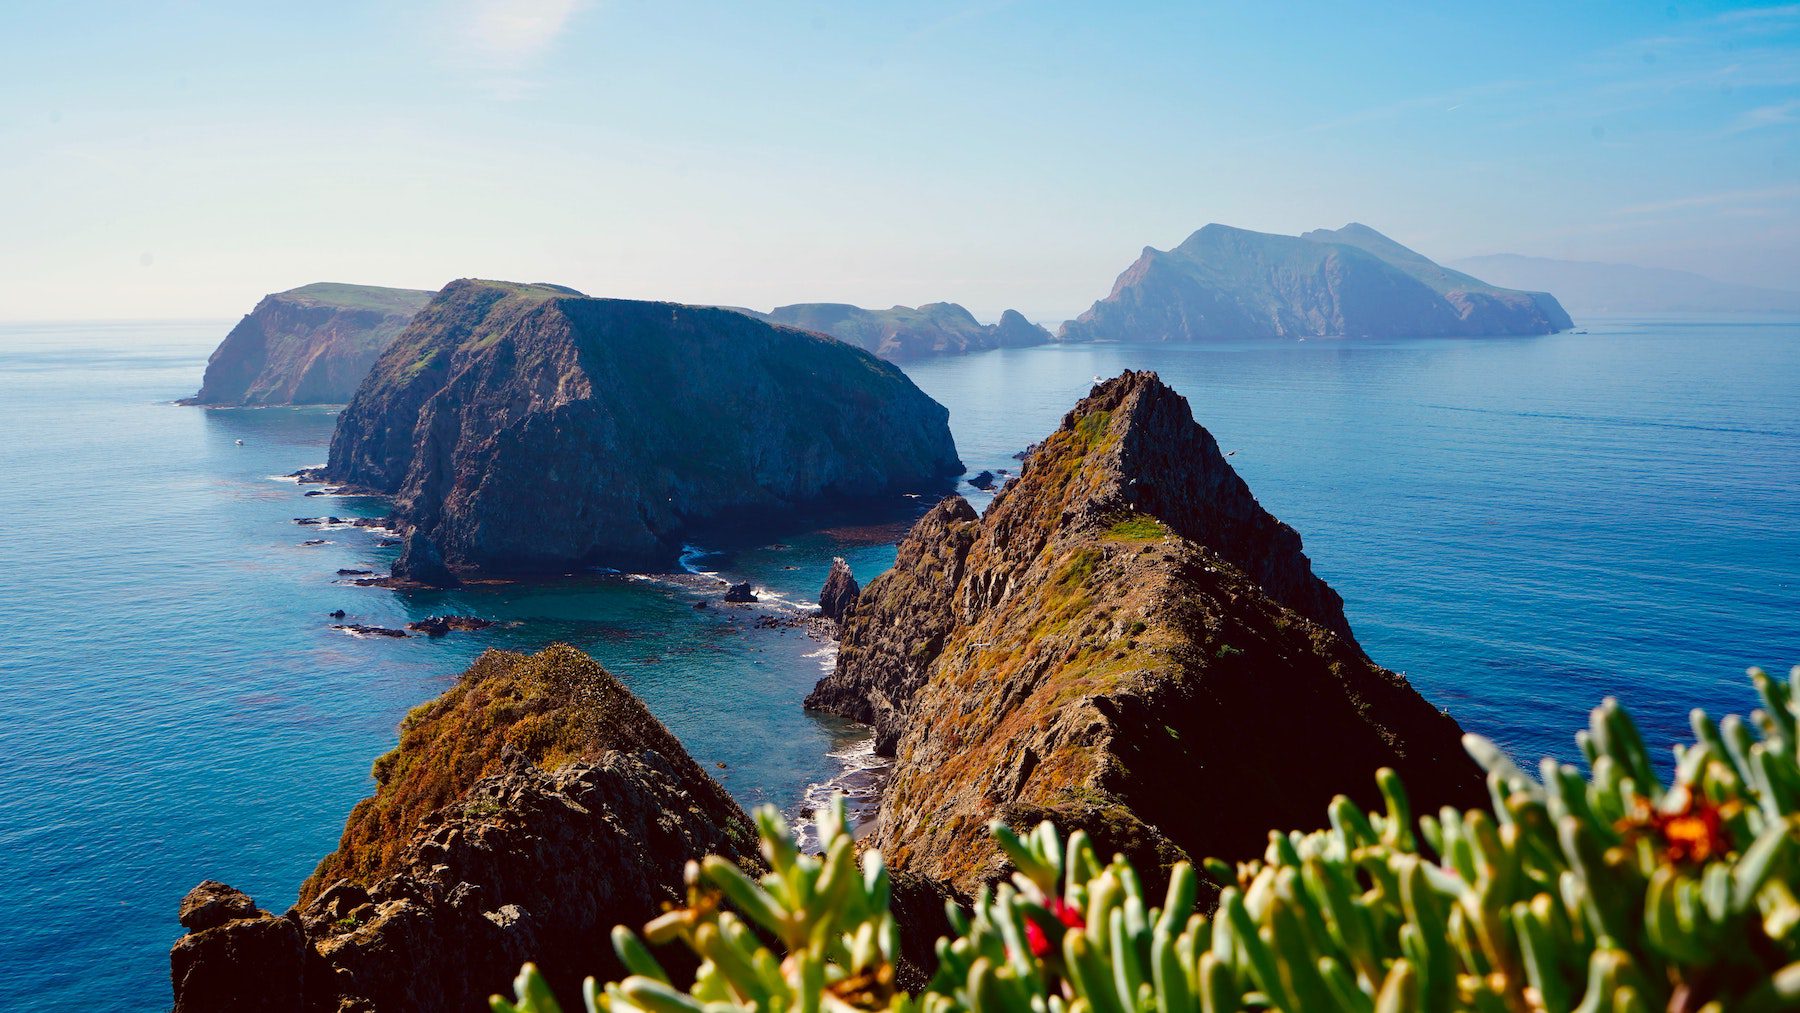 View of deep blue waters and rock formations on cliffs of the Channel Islands in spring, with flowers in foreground.